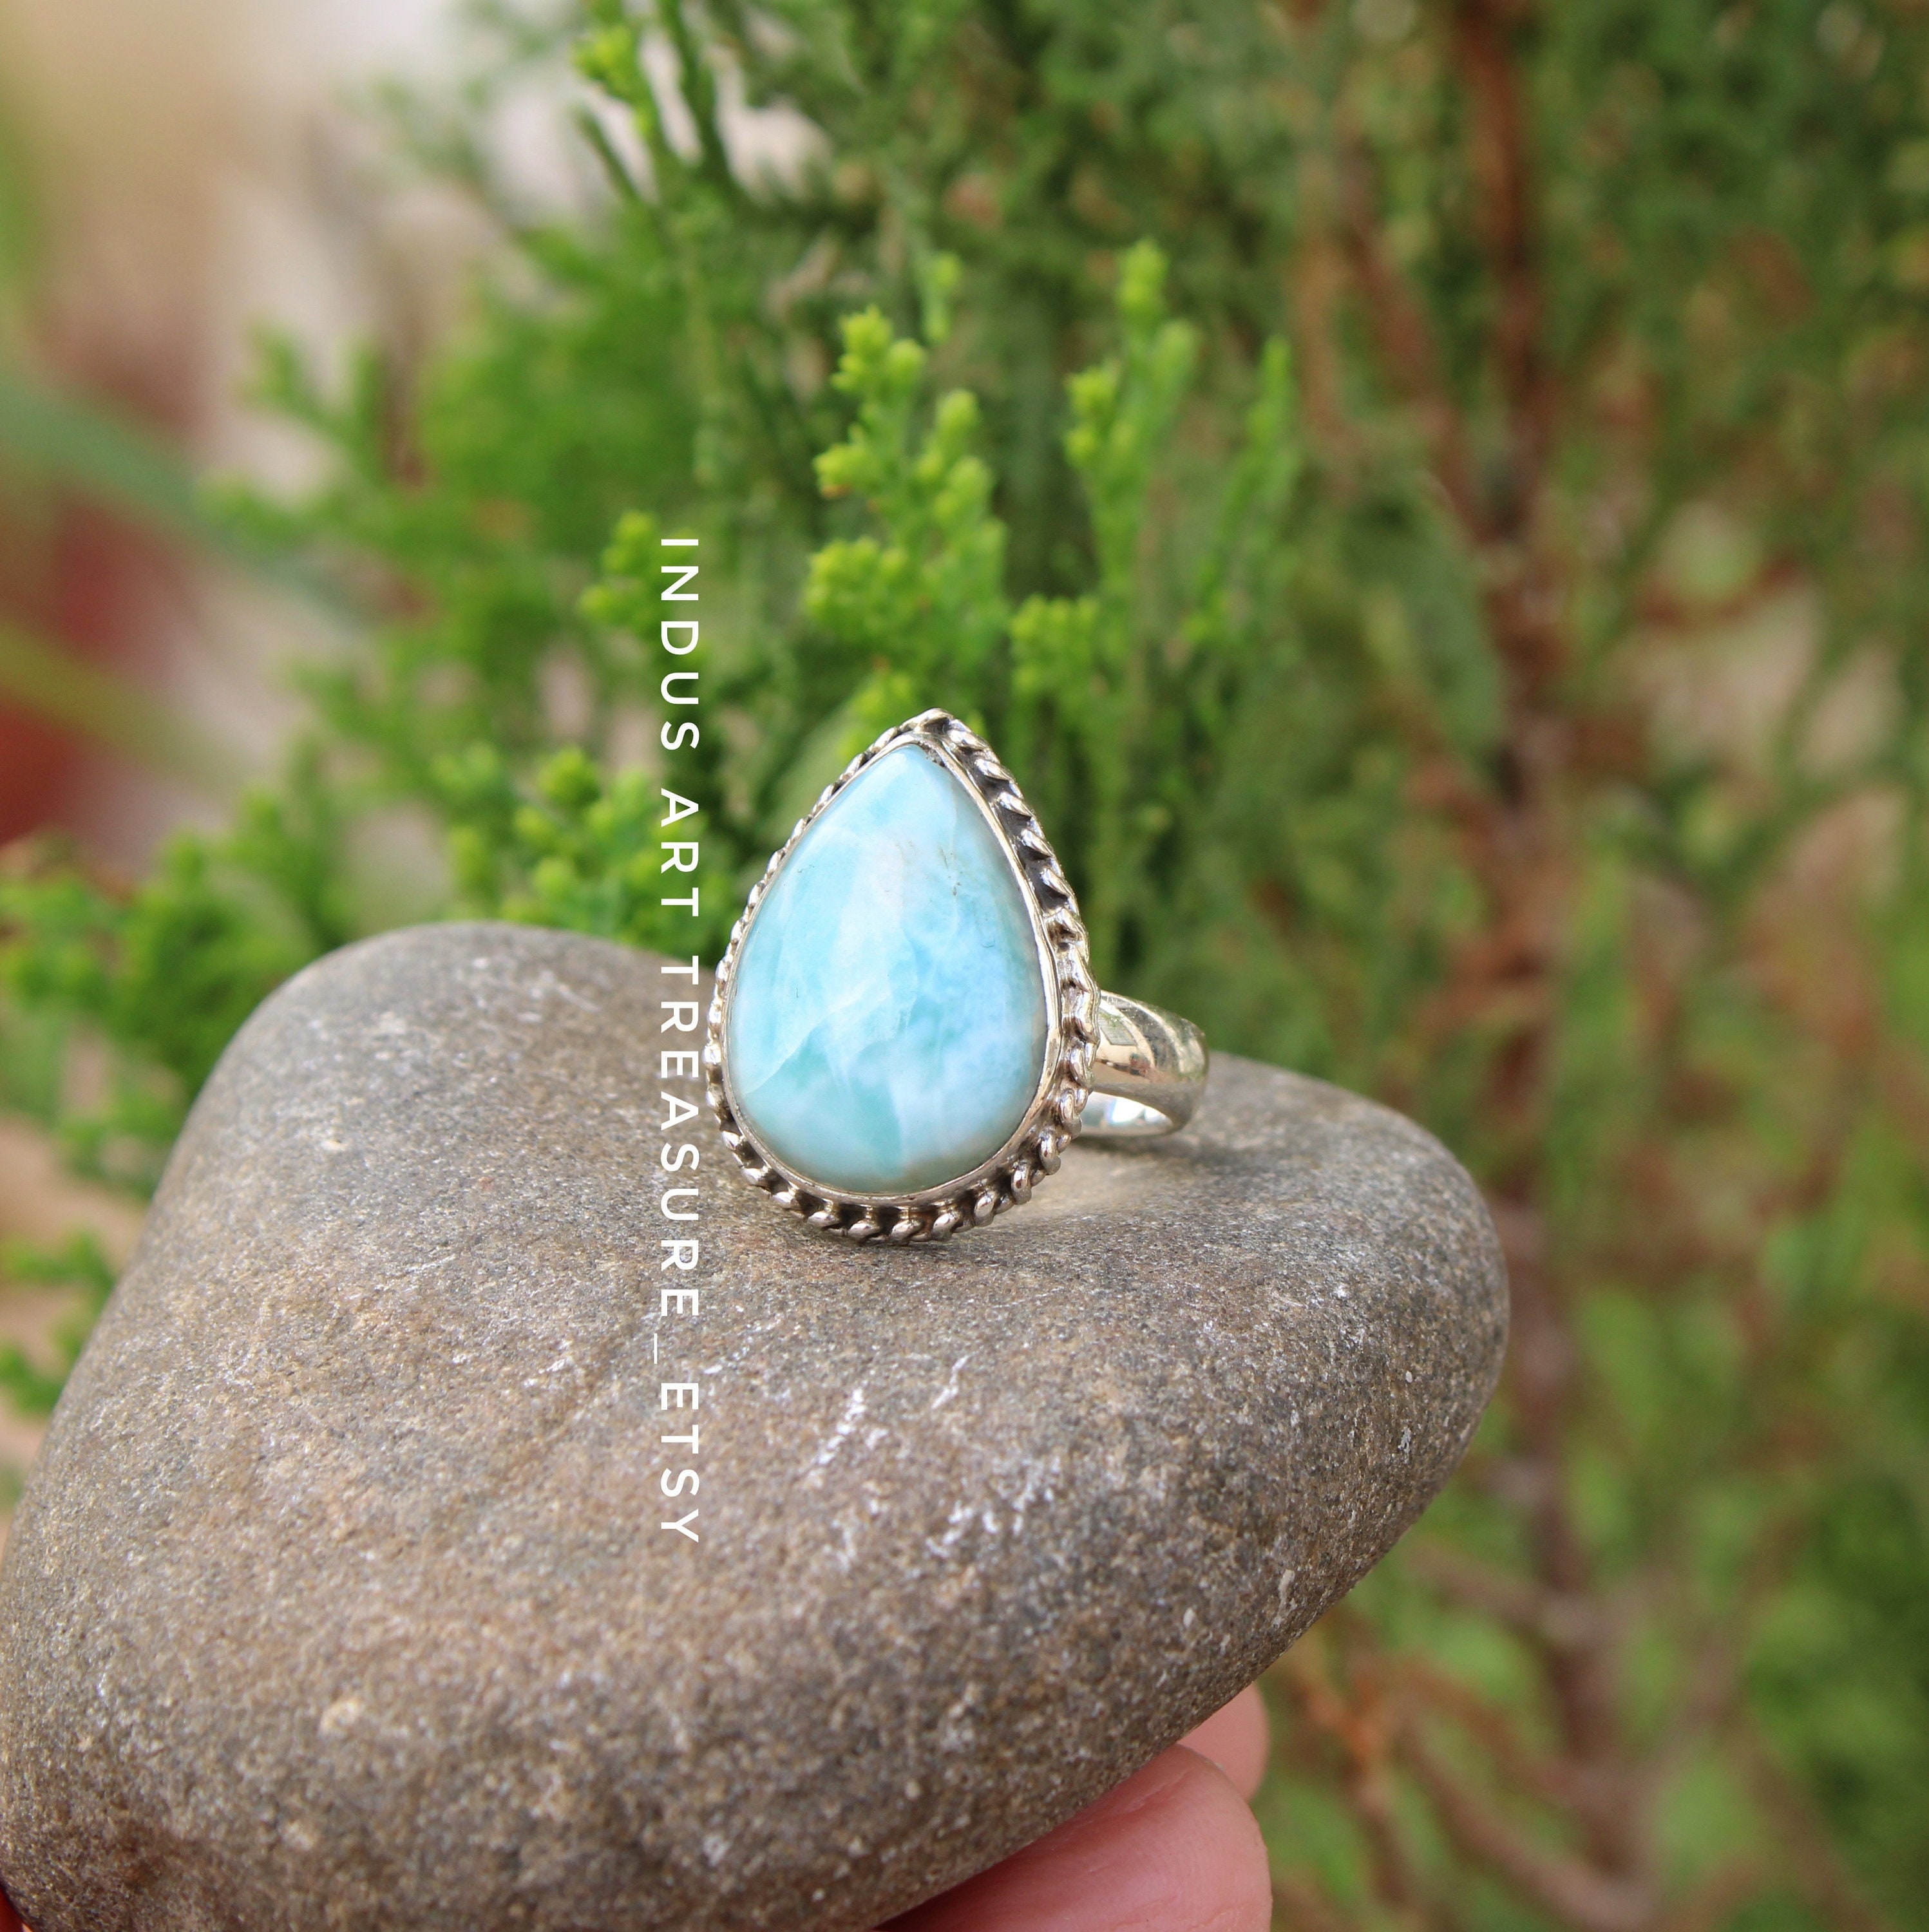 Sterling Silver Locket Ring with Natural Larimar Stones - Peace Treasure